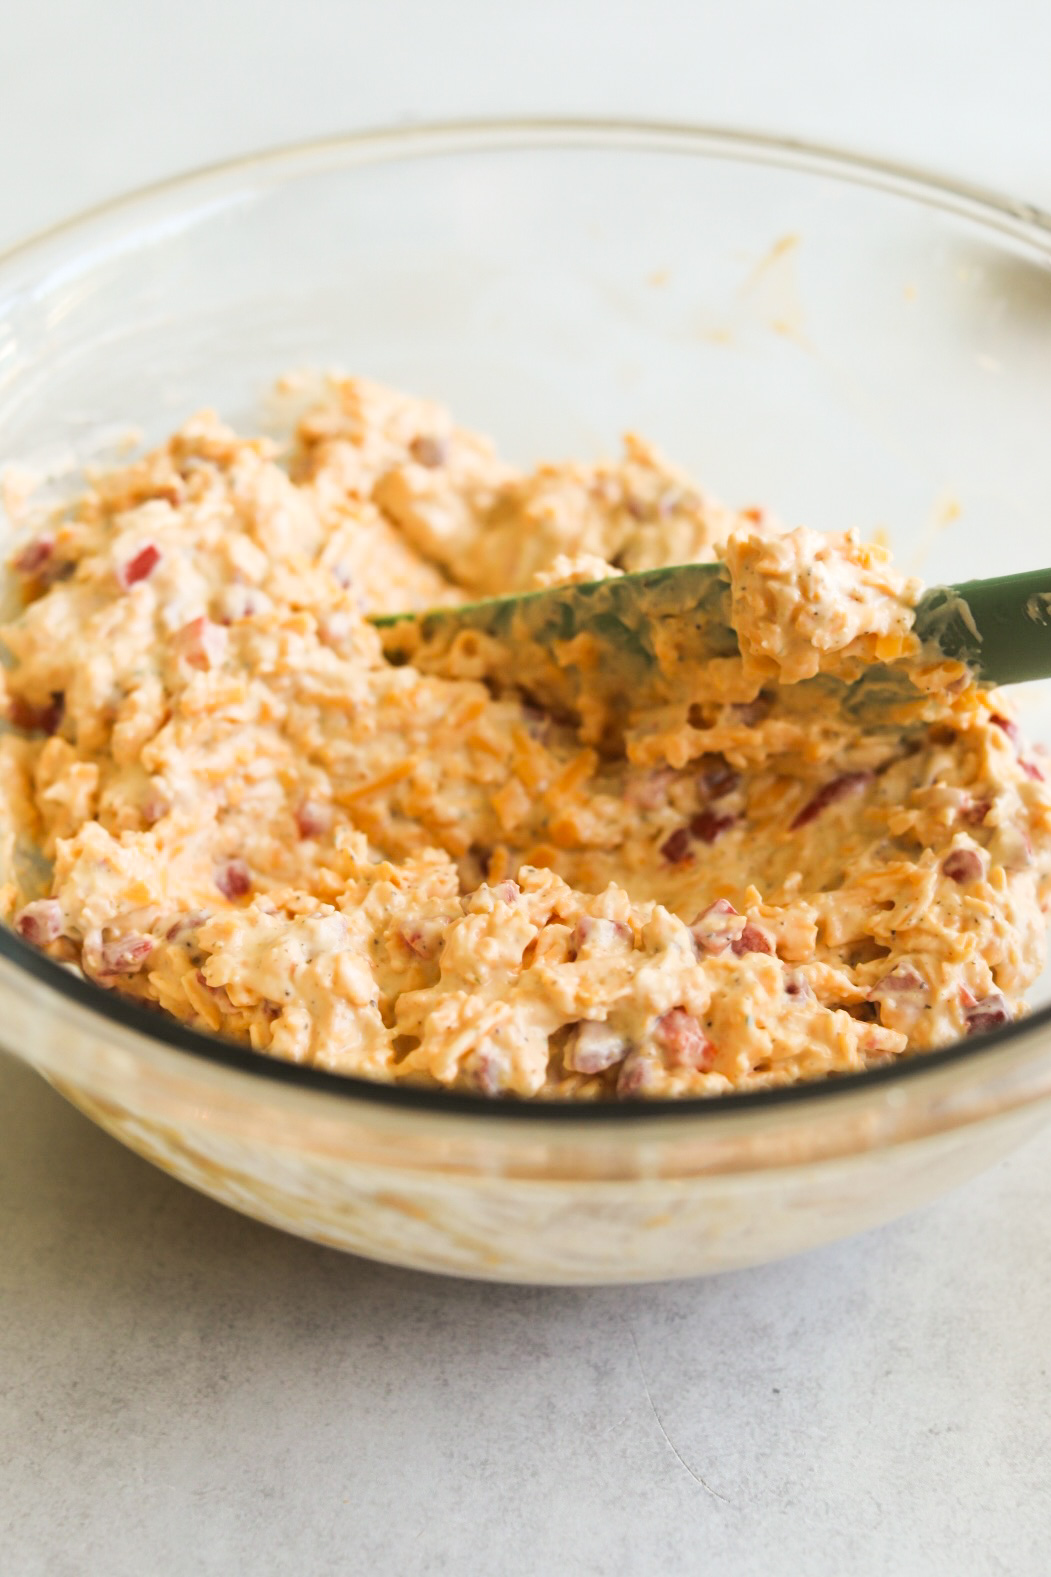 Mixed pimento cheese in a glass bowl with turquoise color spatula.